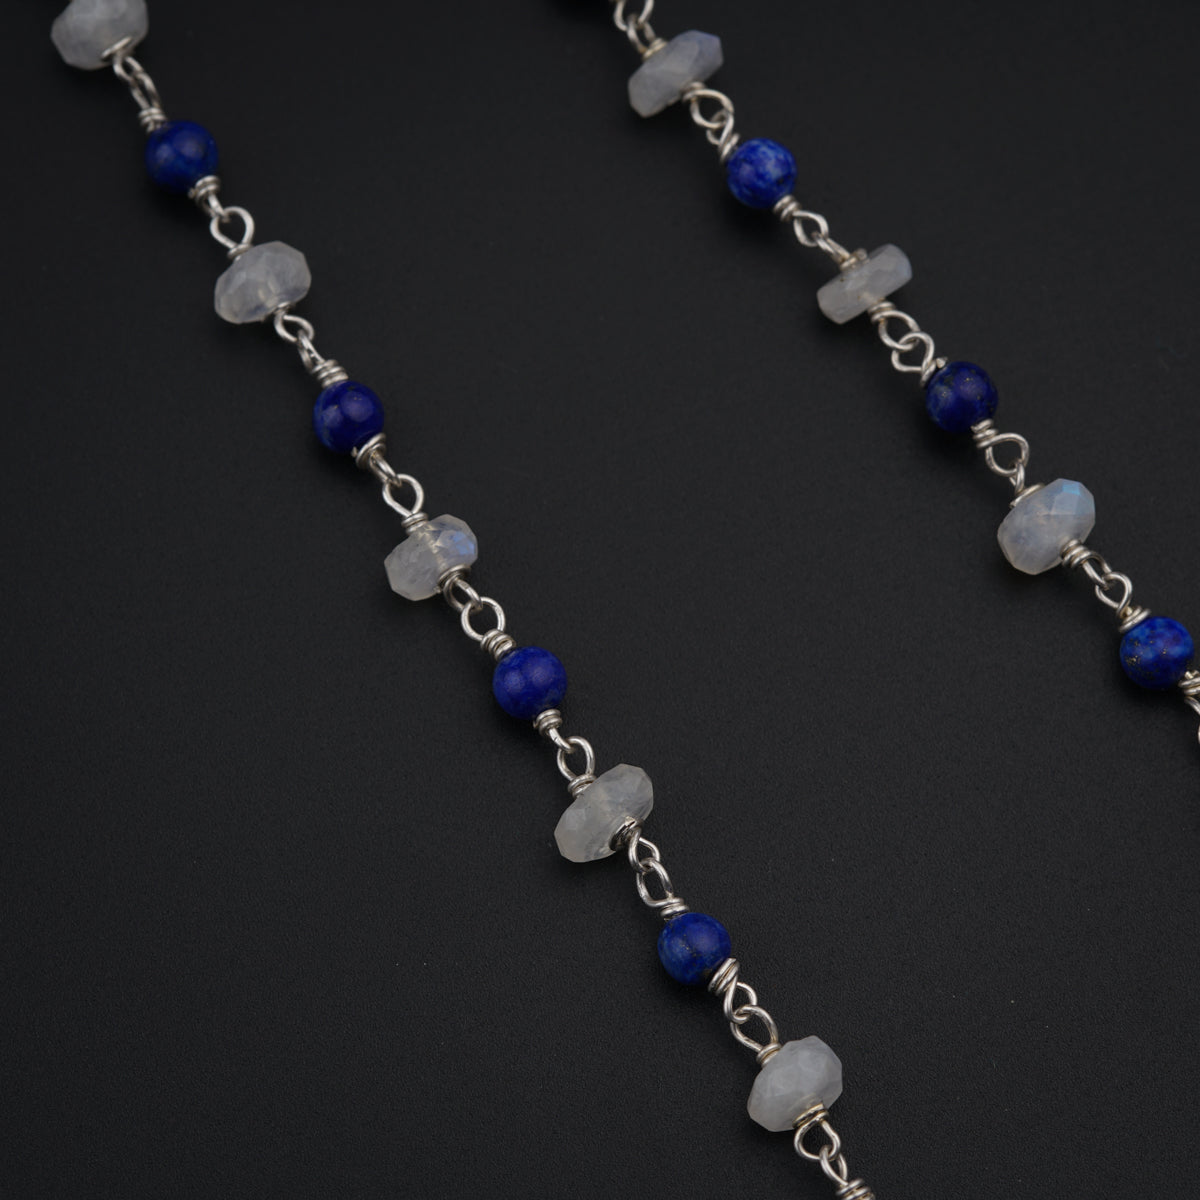 a blue and white beaded necklace on a black surface